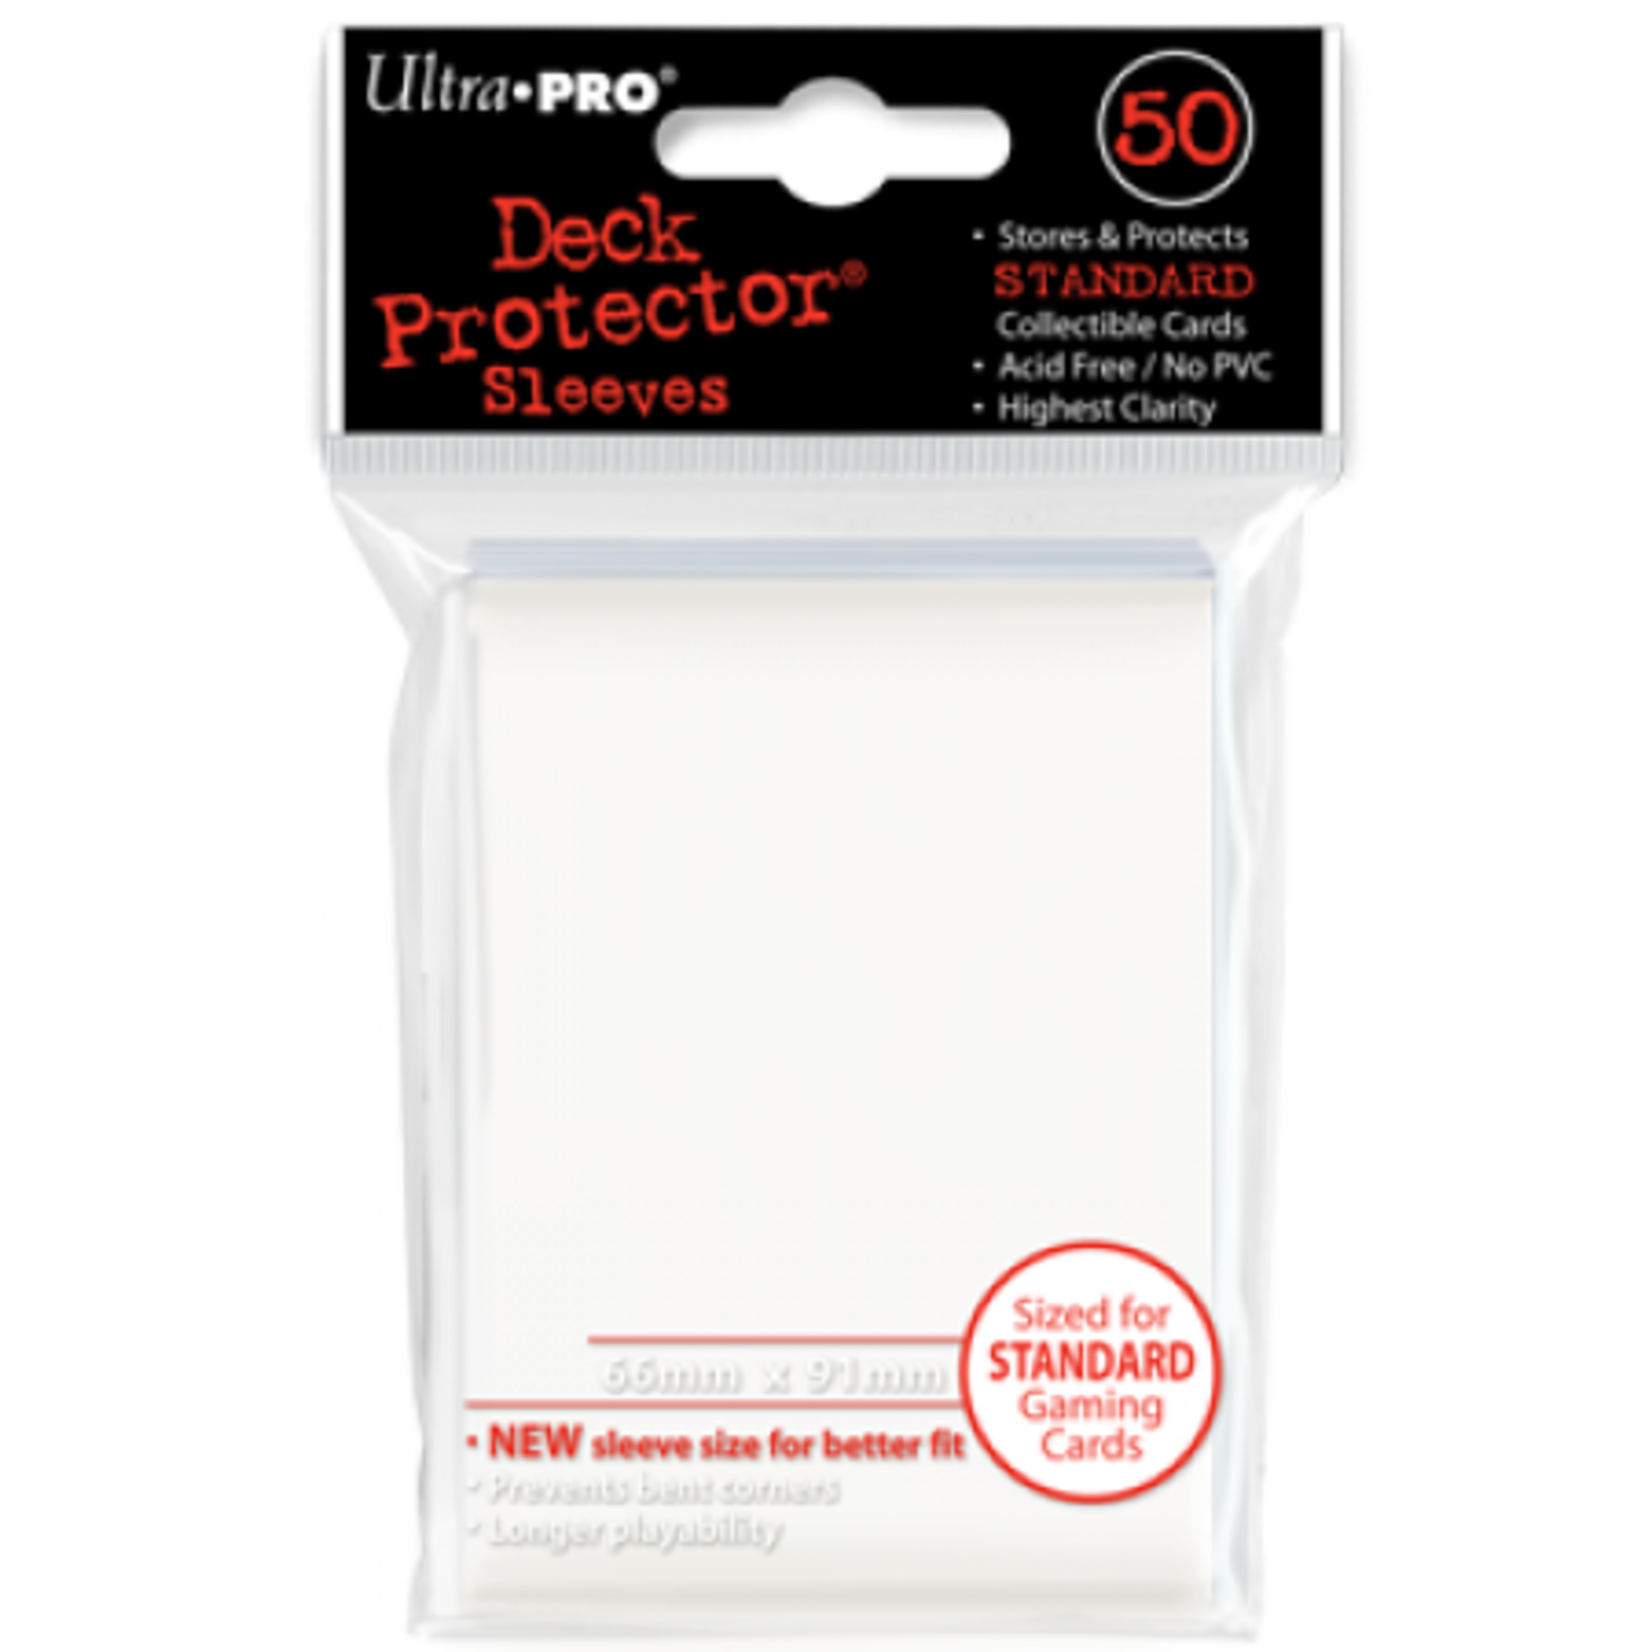 Ultra Pro Ultra Pro Pro-Gloss Standard Deck Protector Sleeves White 50 ct